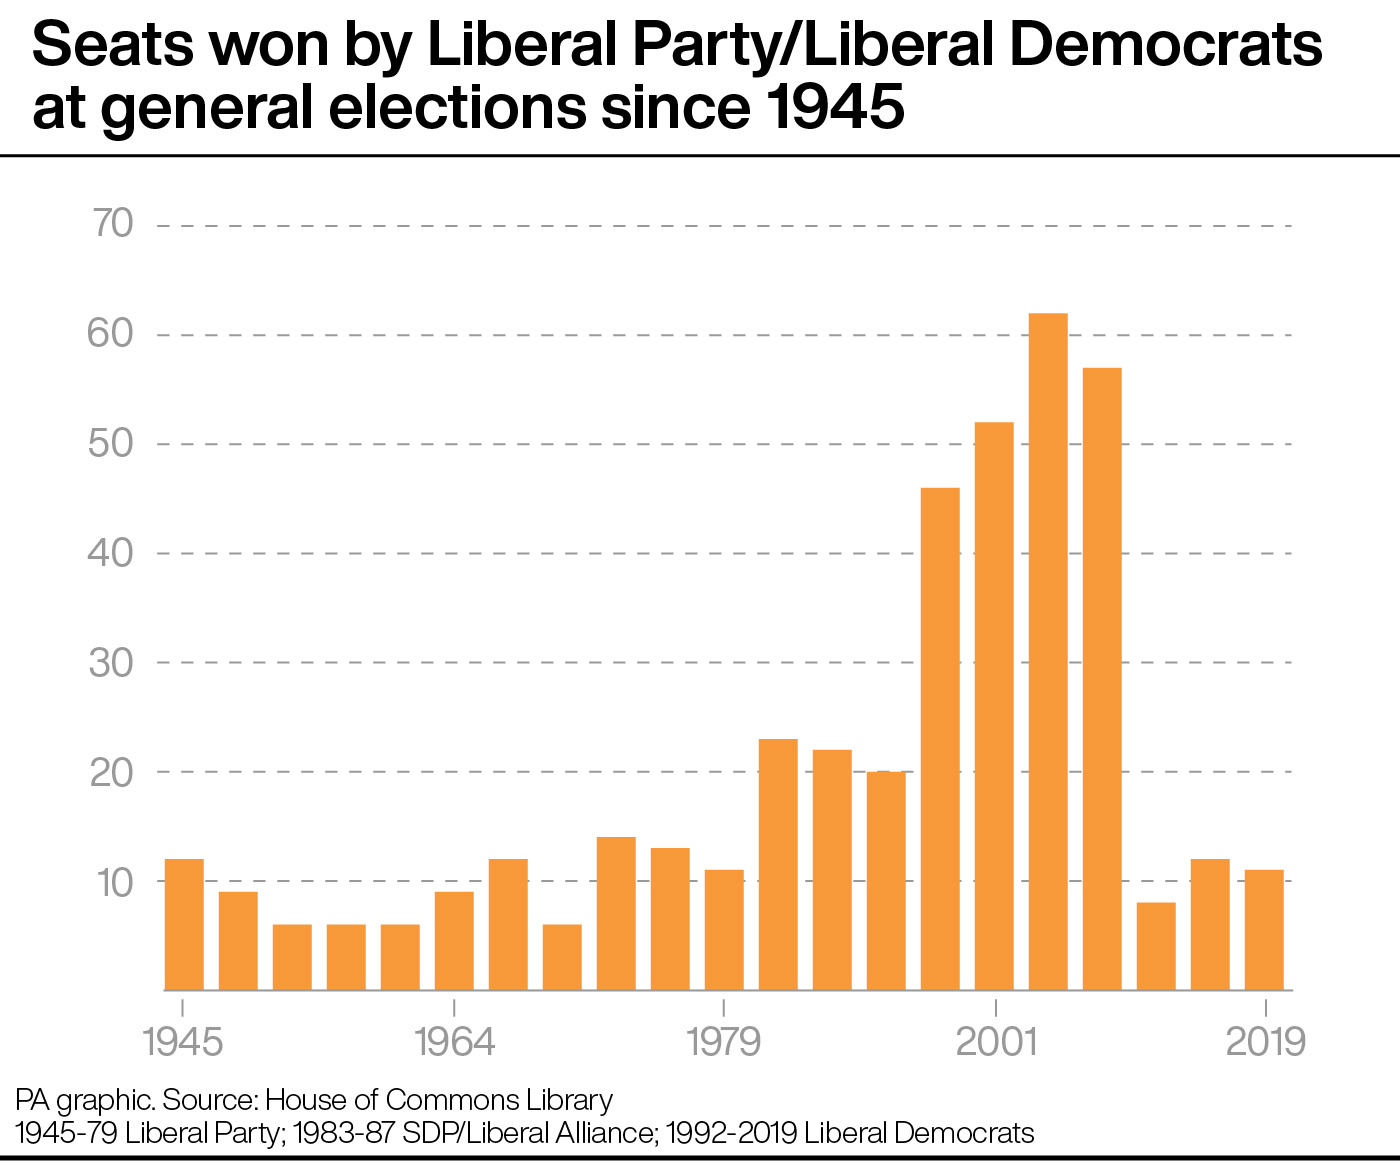 A chart showing seats won by the Liberals or Liberal Democrats at general elections since 1945